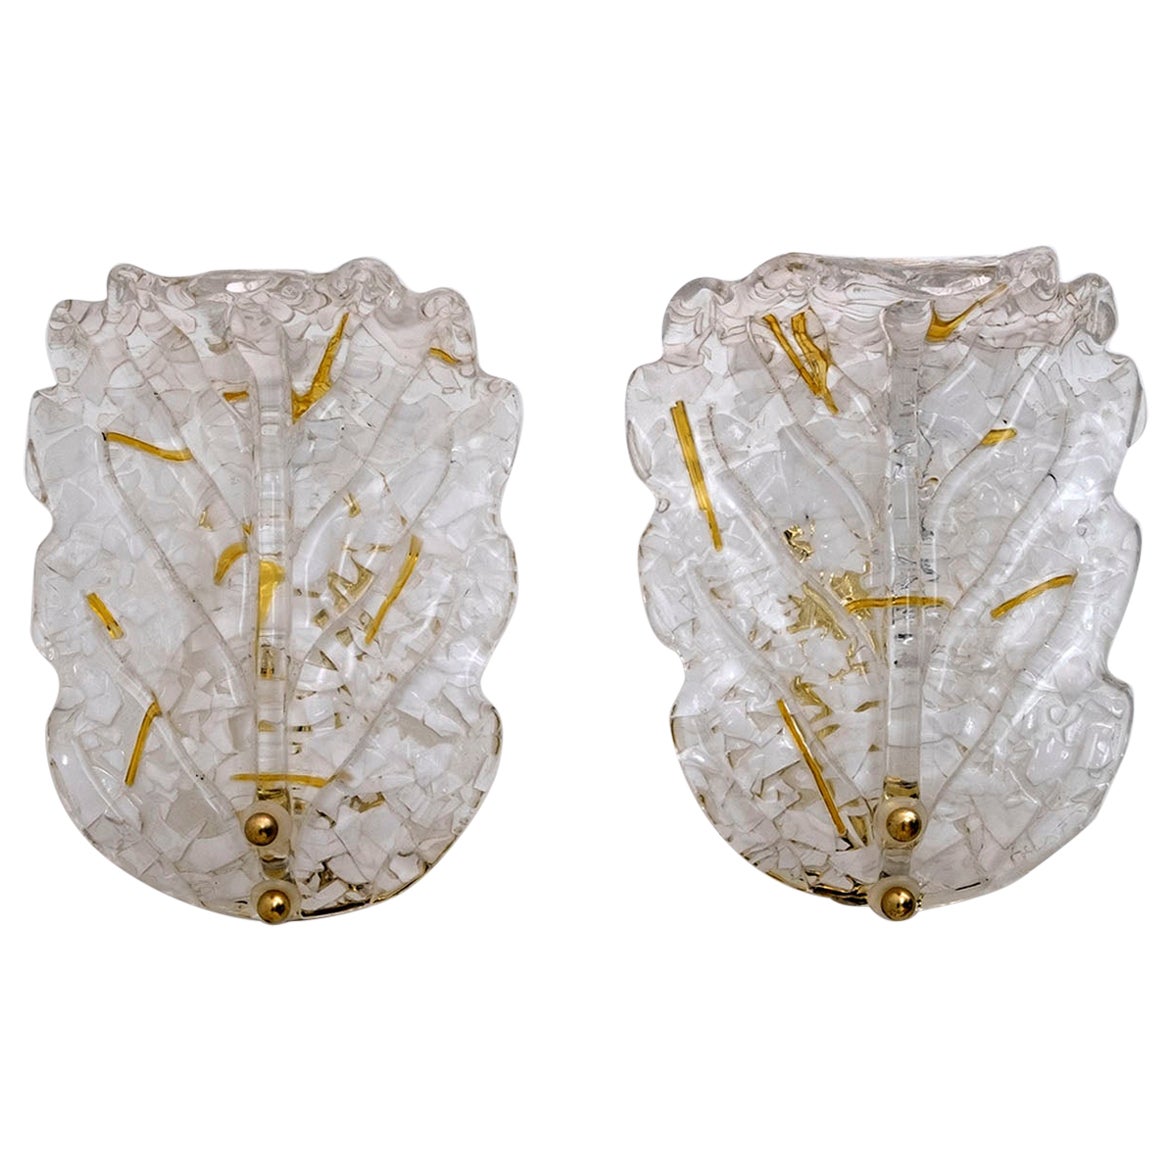 Pair of Art Deco Style Italian Murano Glass Leaf and Wall Sconces, 1960s